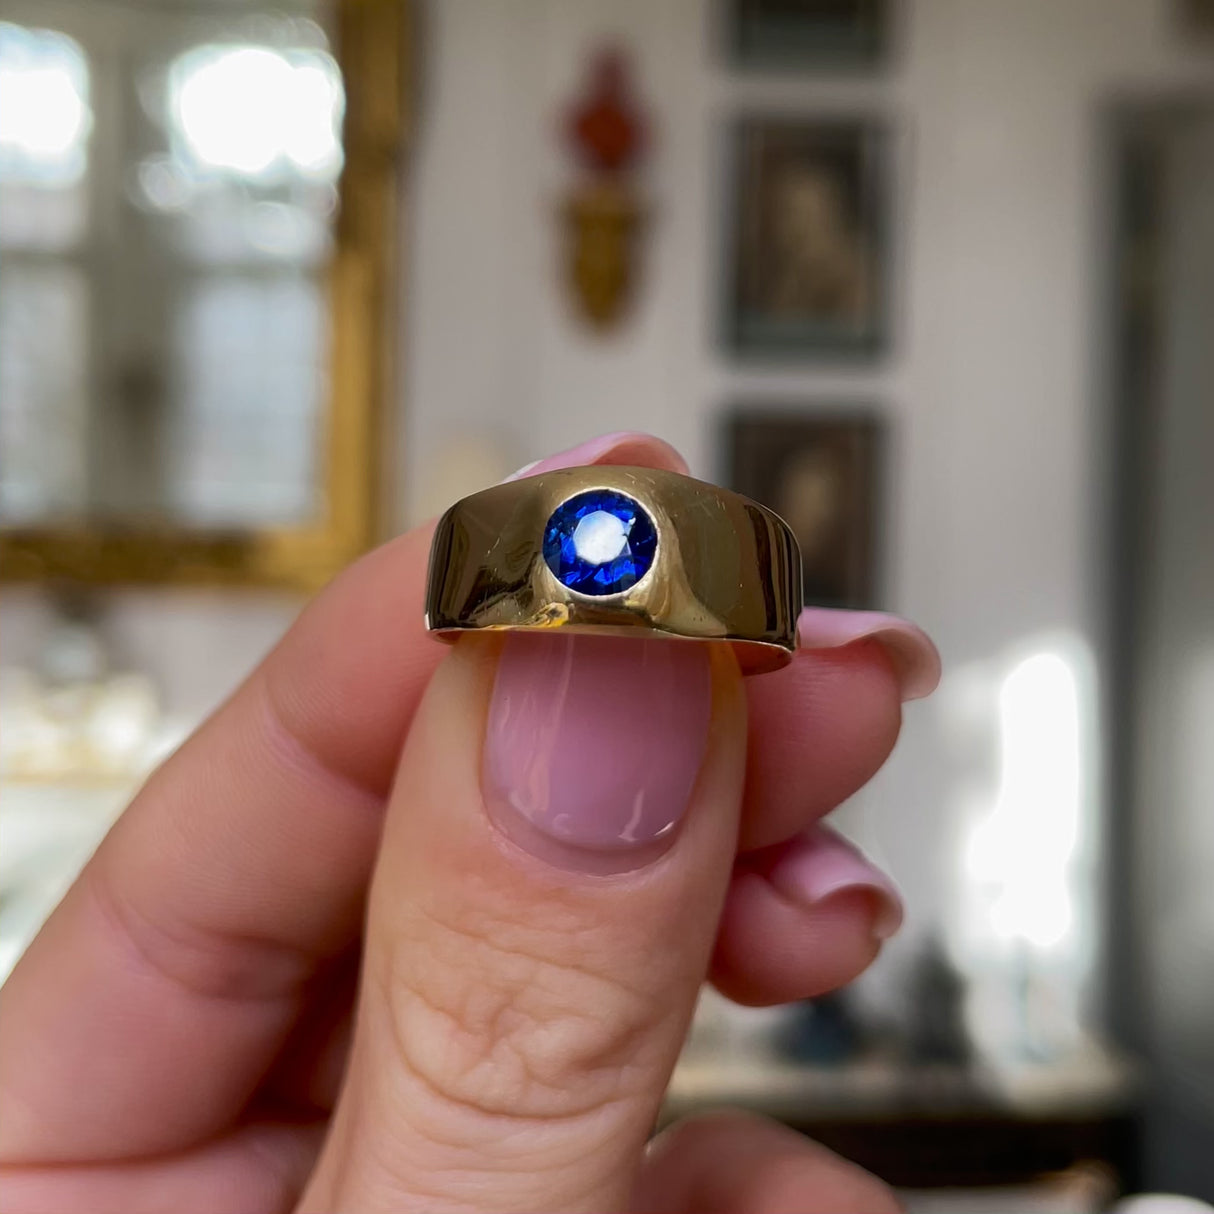 Victorian Burmese sapphire engagement ring, held ijn fingers and moved around to give perspective.